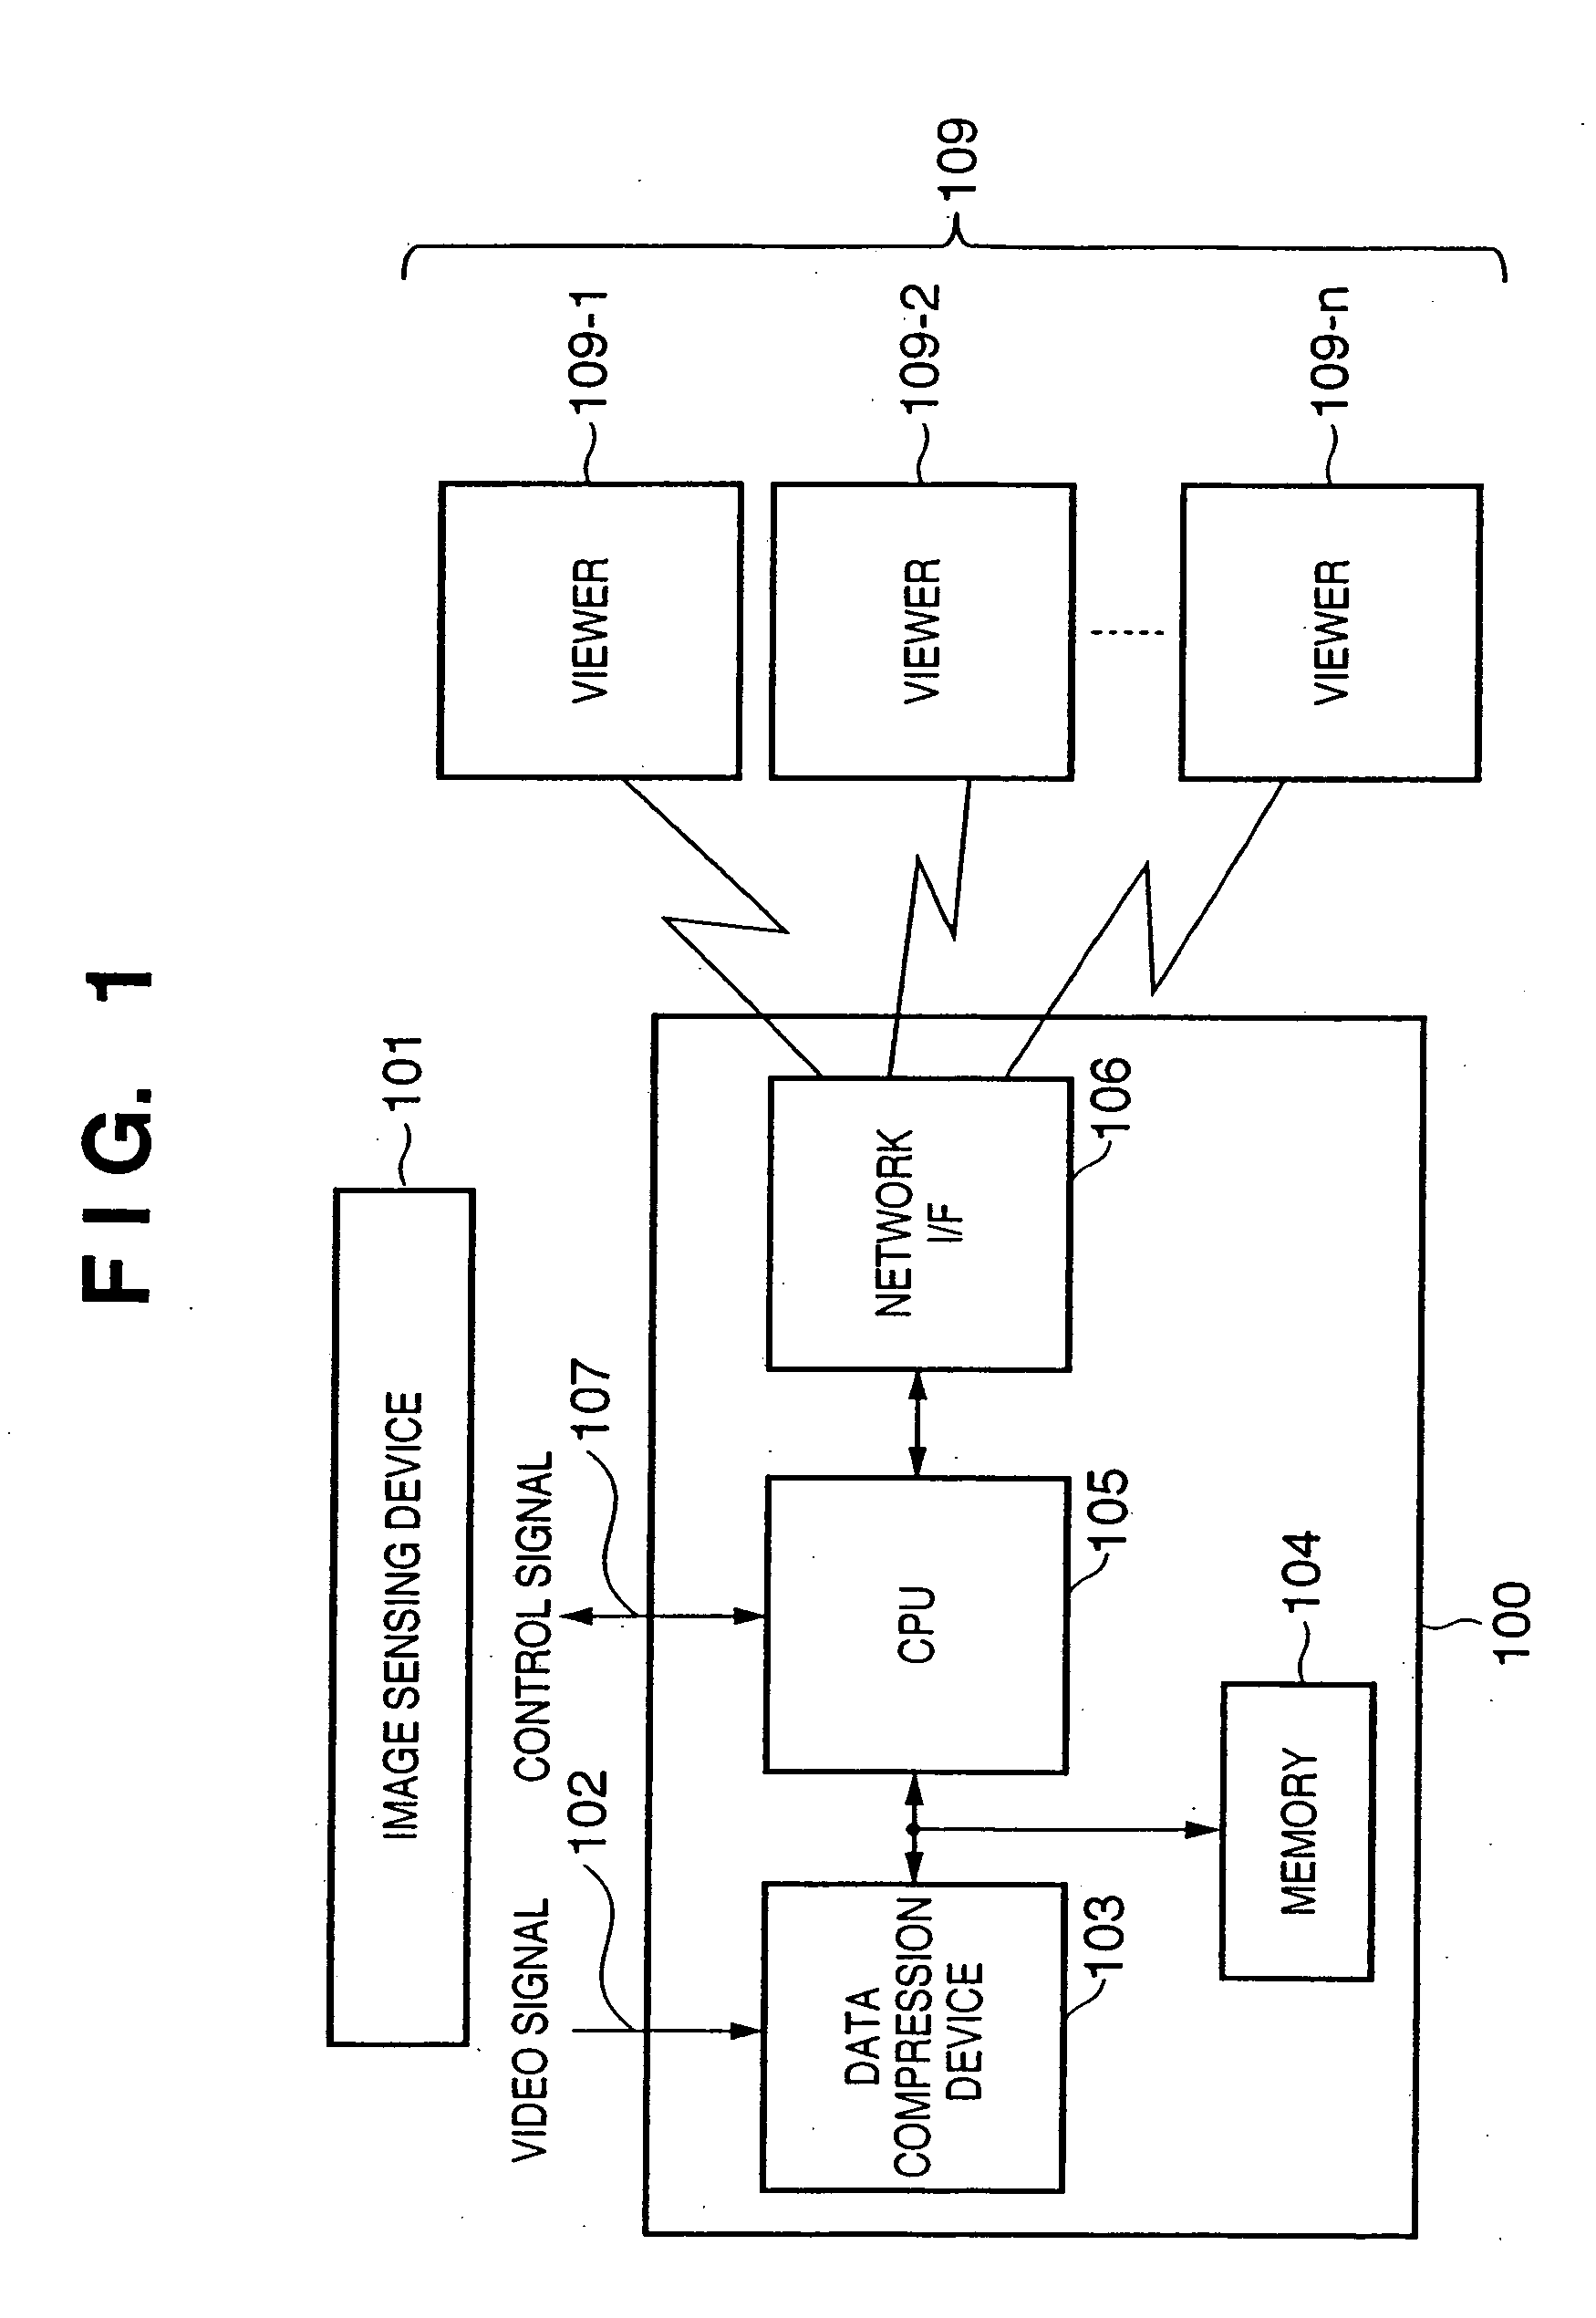 Video delivery apparatus and method